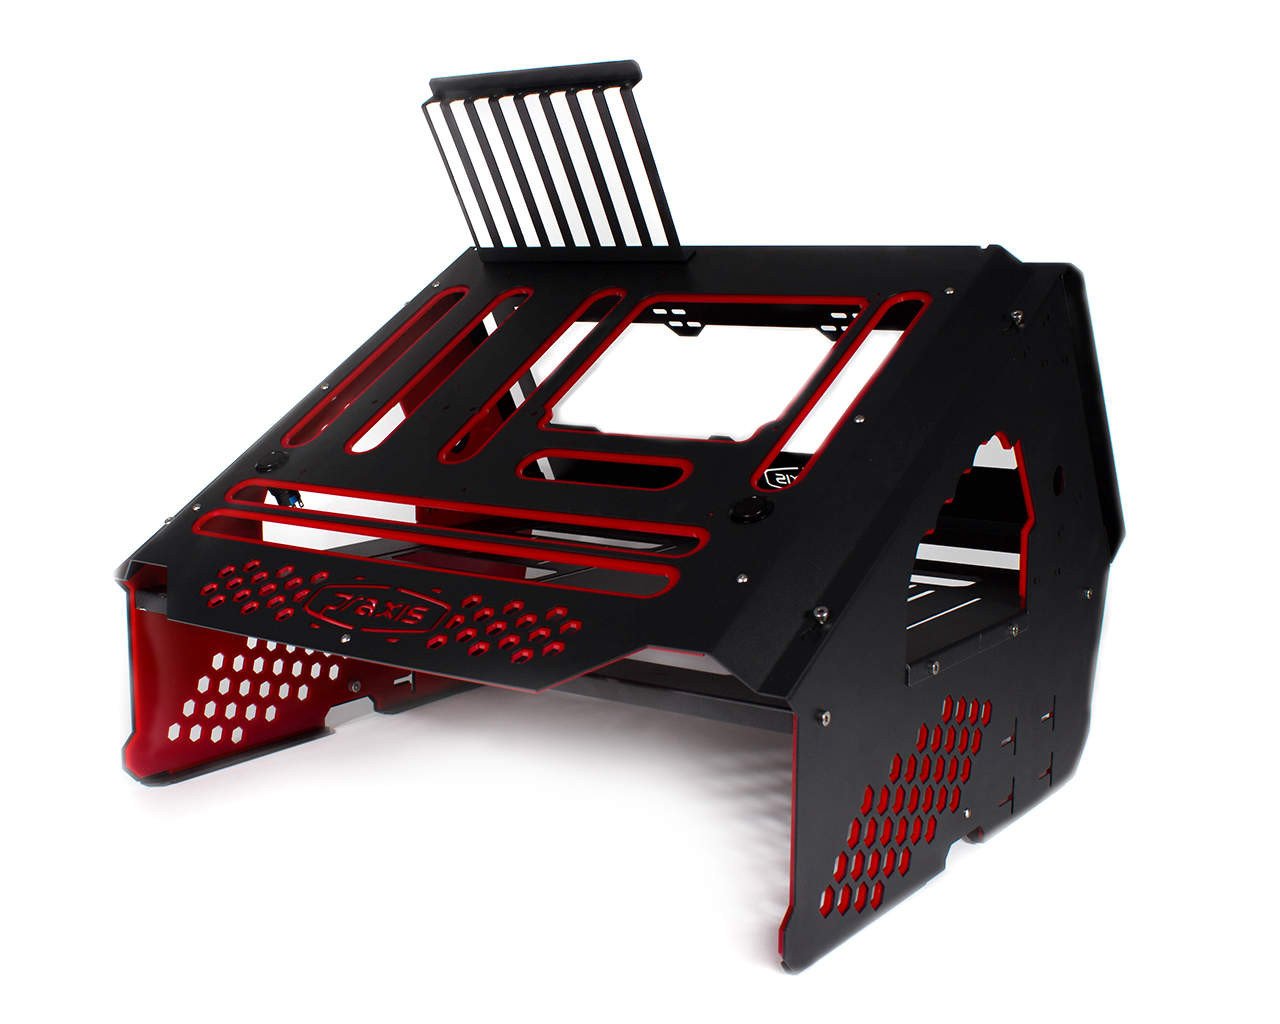 PrimoChill's Praxis Wetbench Powdercoated Steel Modular Open Air Computer Test Bench for Watercooling or Air Cooled Components - PrimoChill - KEEPING IT COOL Black w/ Solid Red Accents